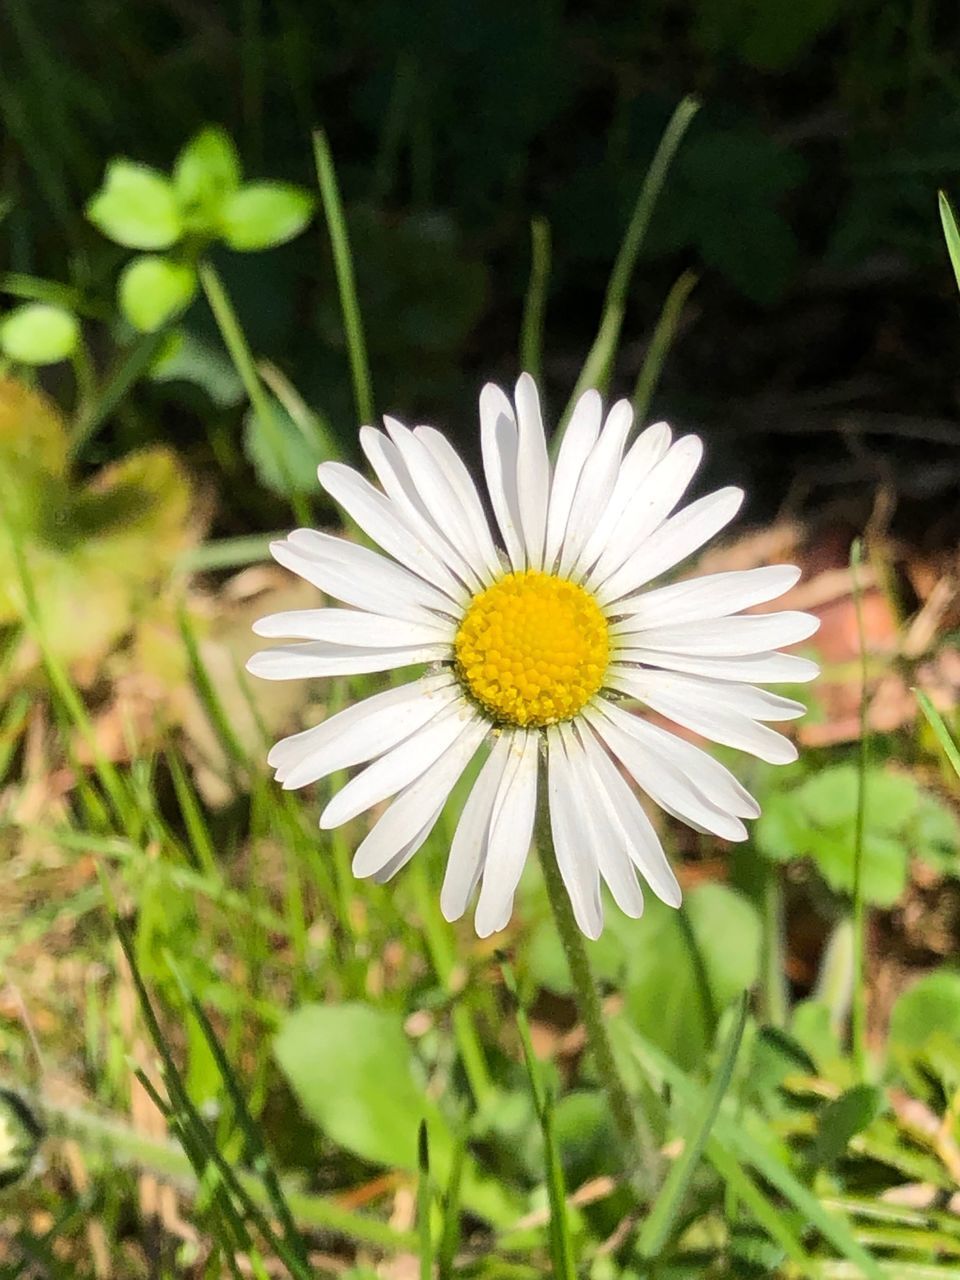 CLOSE-UP OF WHITE DAISY FLOWER OUTDOORS